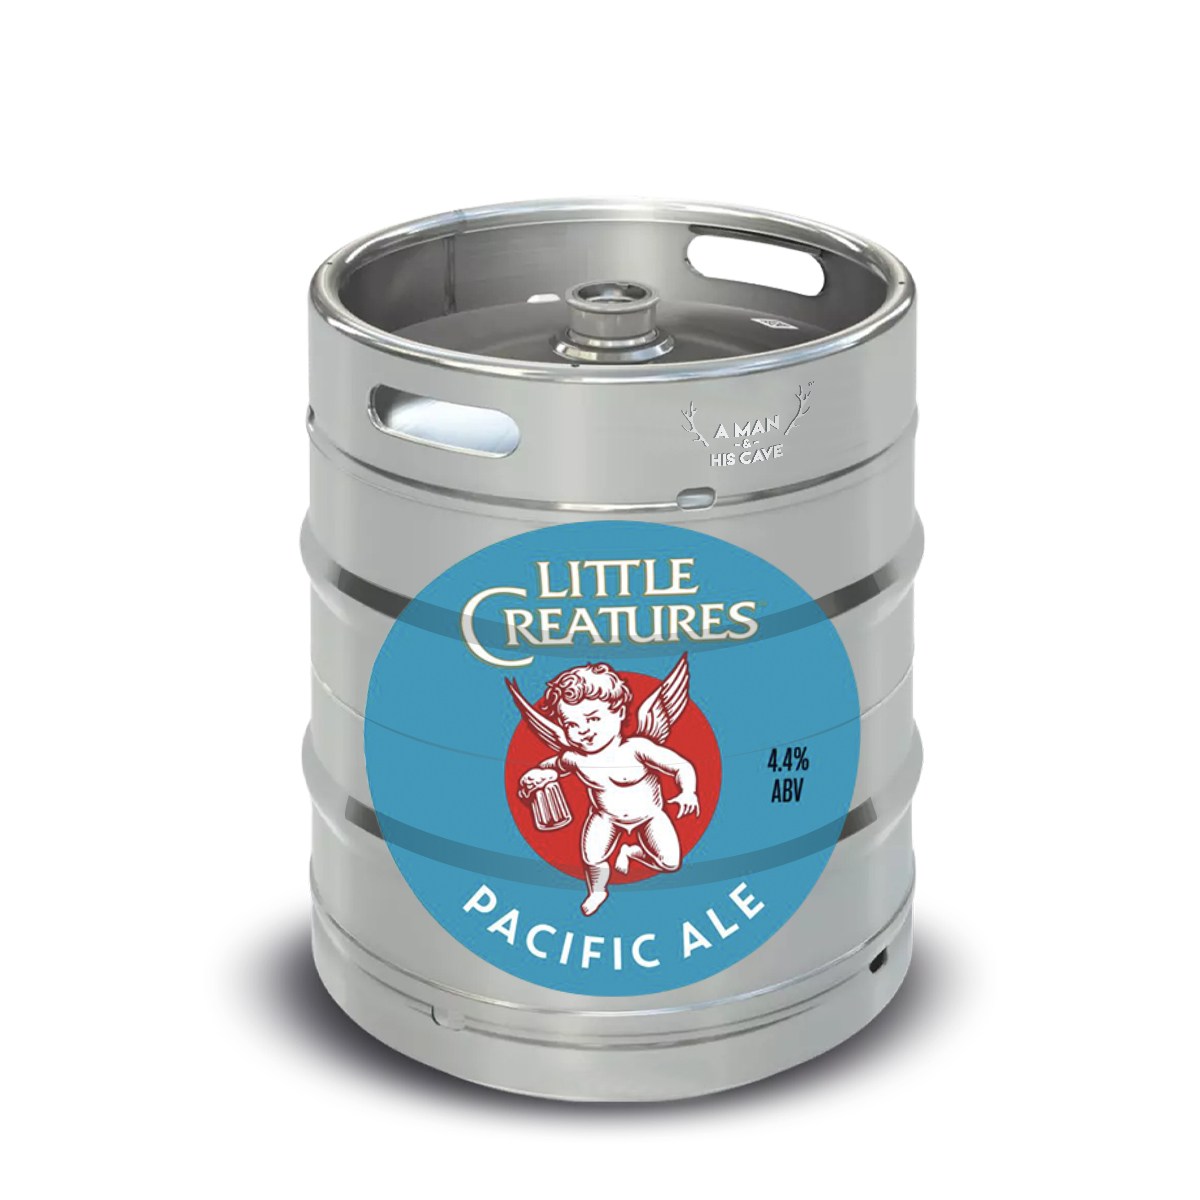 Beer Keg - LITTLE CREATURES PACIFIC ALE 50lt Commercial Keg 4.4% A-Type Coupler [NSW]